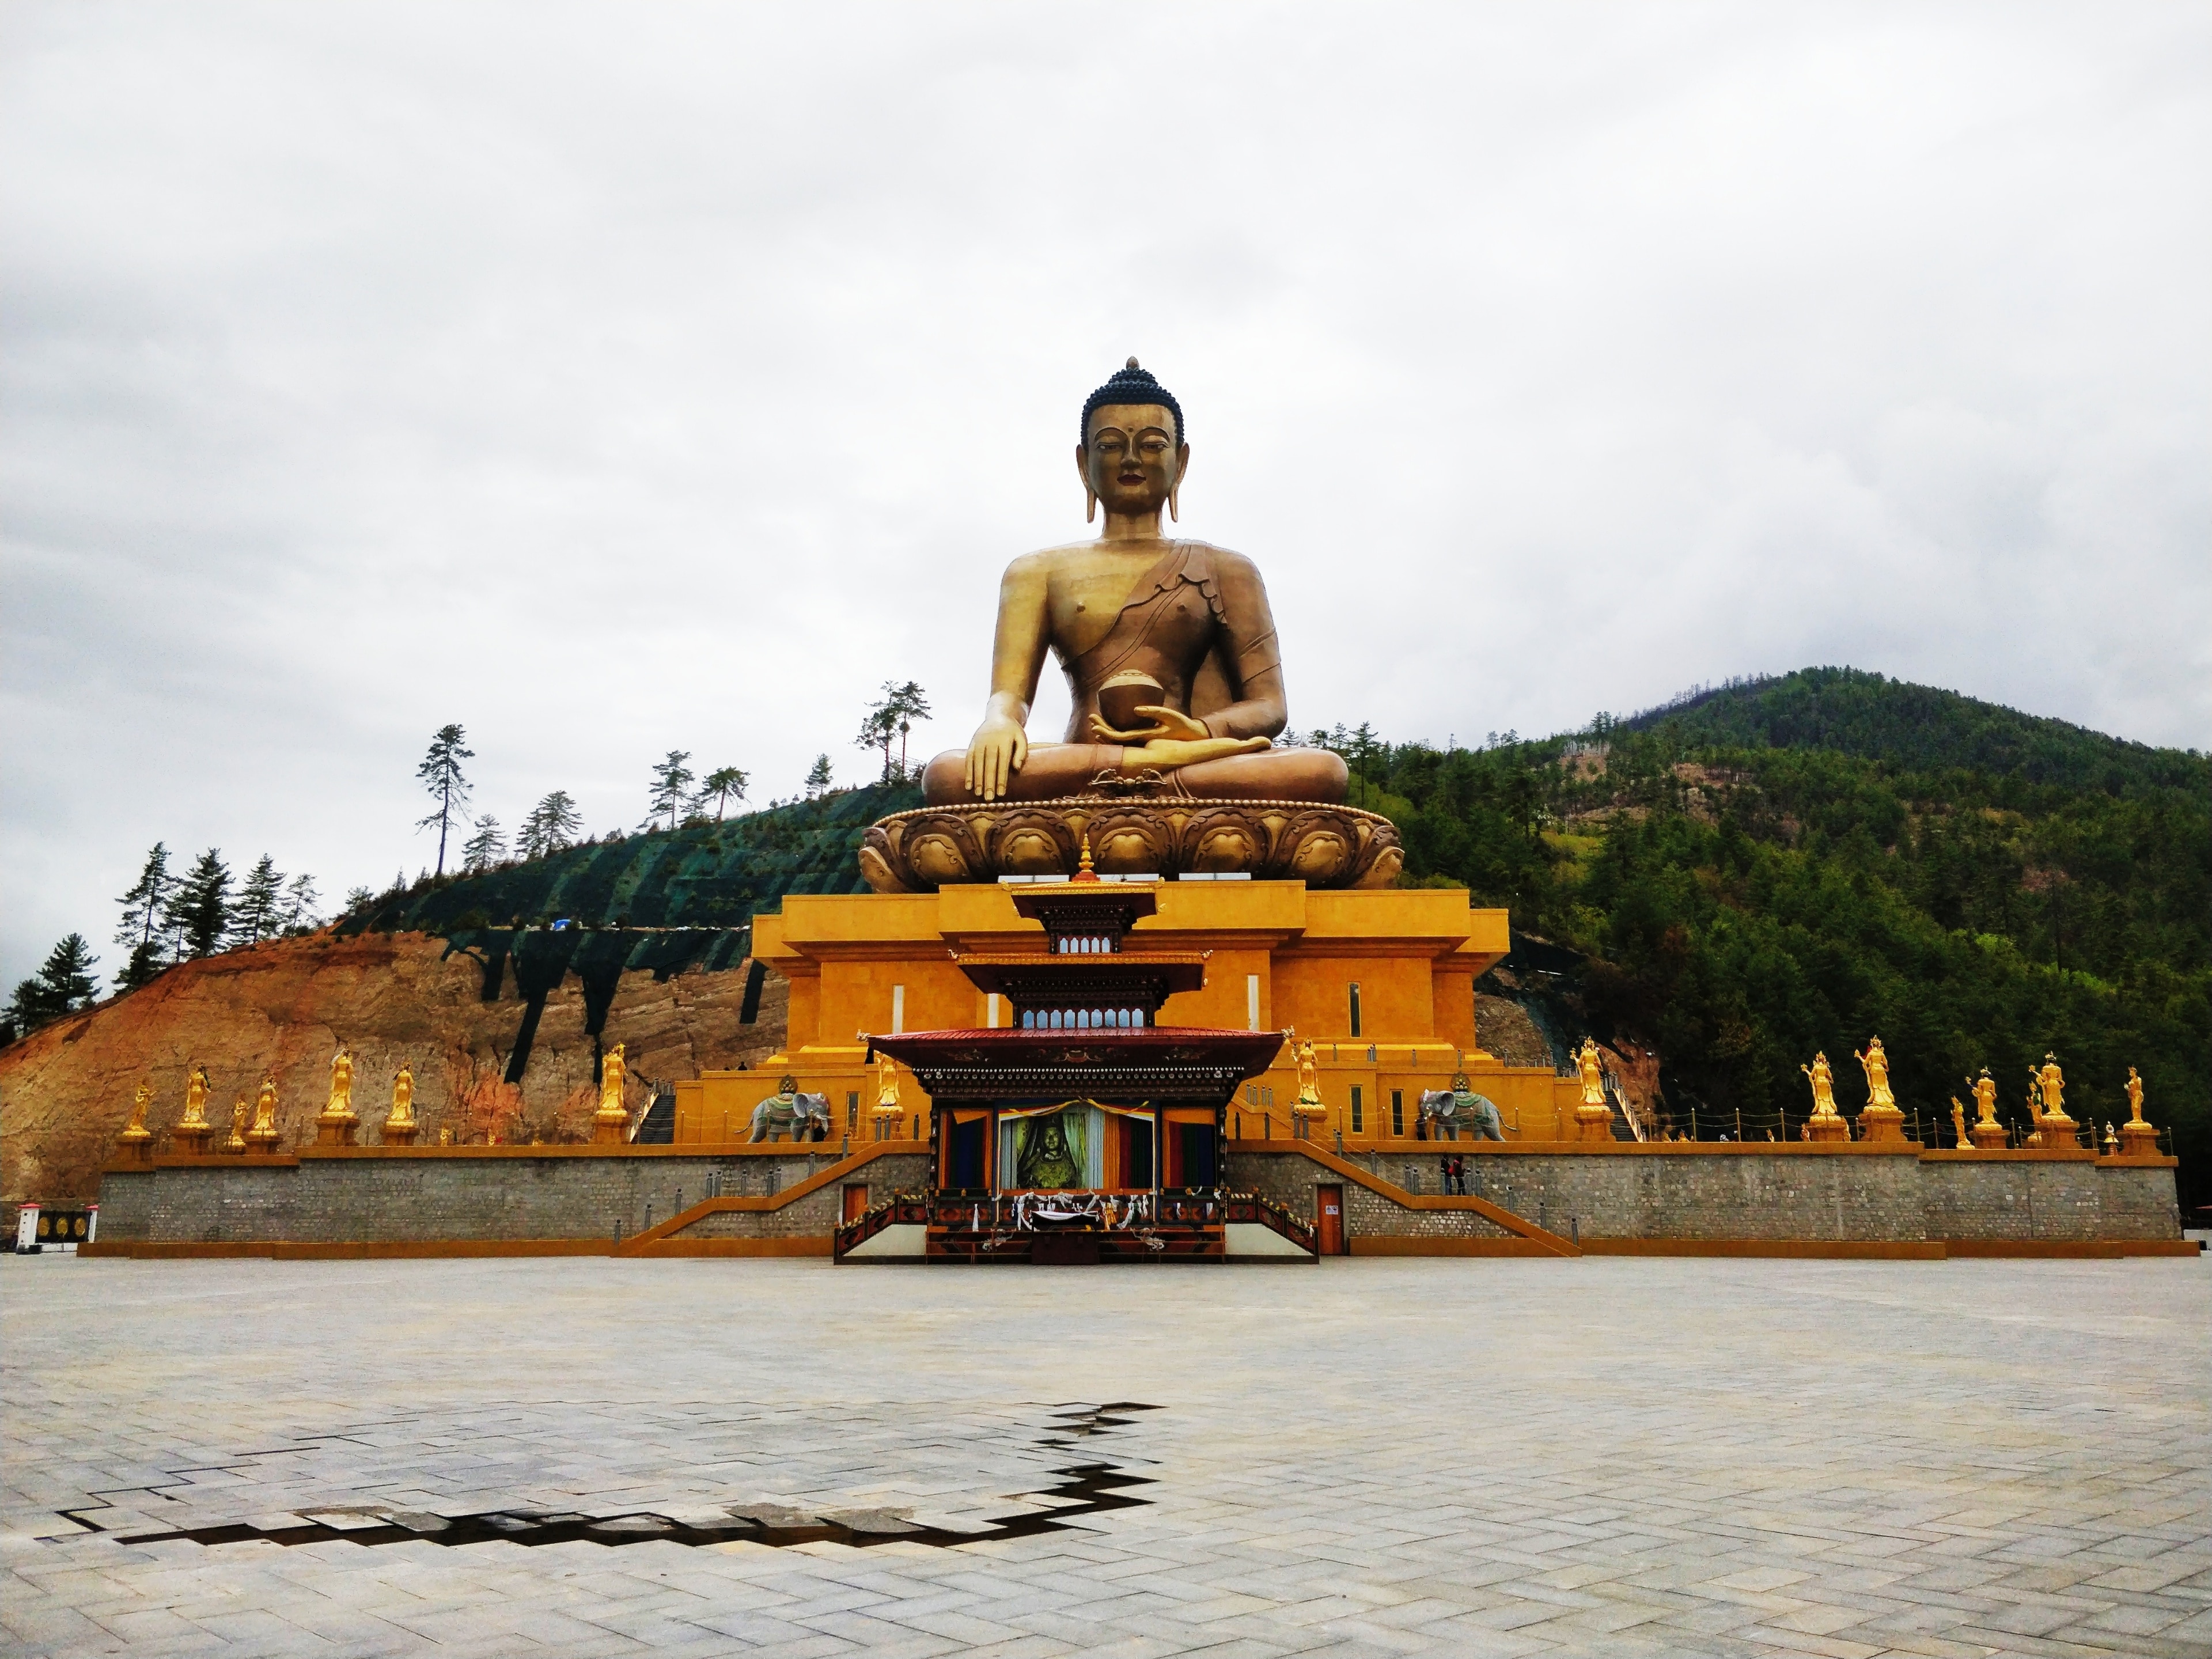 Famously called the Buddha point, this majestic figure had an unmissable aura!
It was eerily calm and quiet here!

#buddhapoint #bhutan101 #travels2018